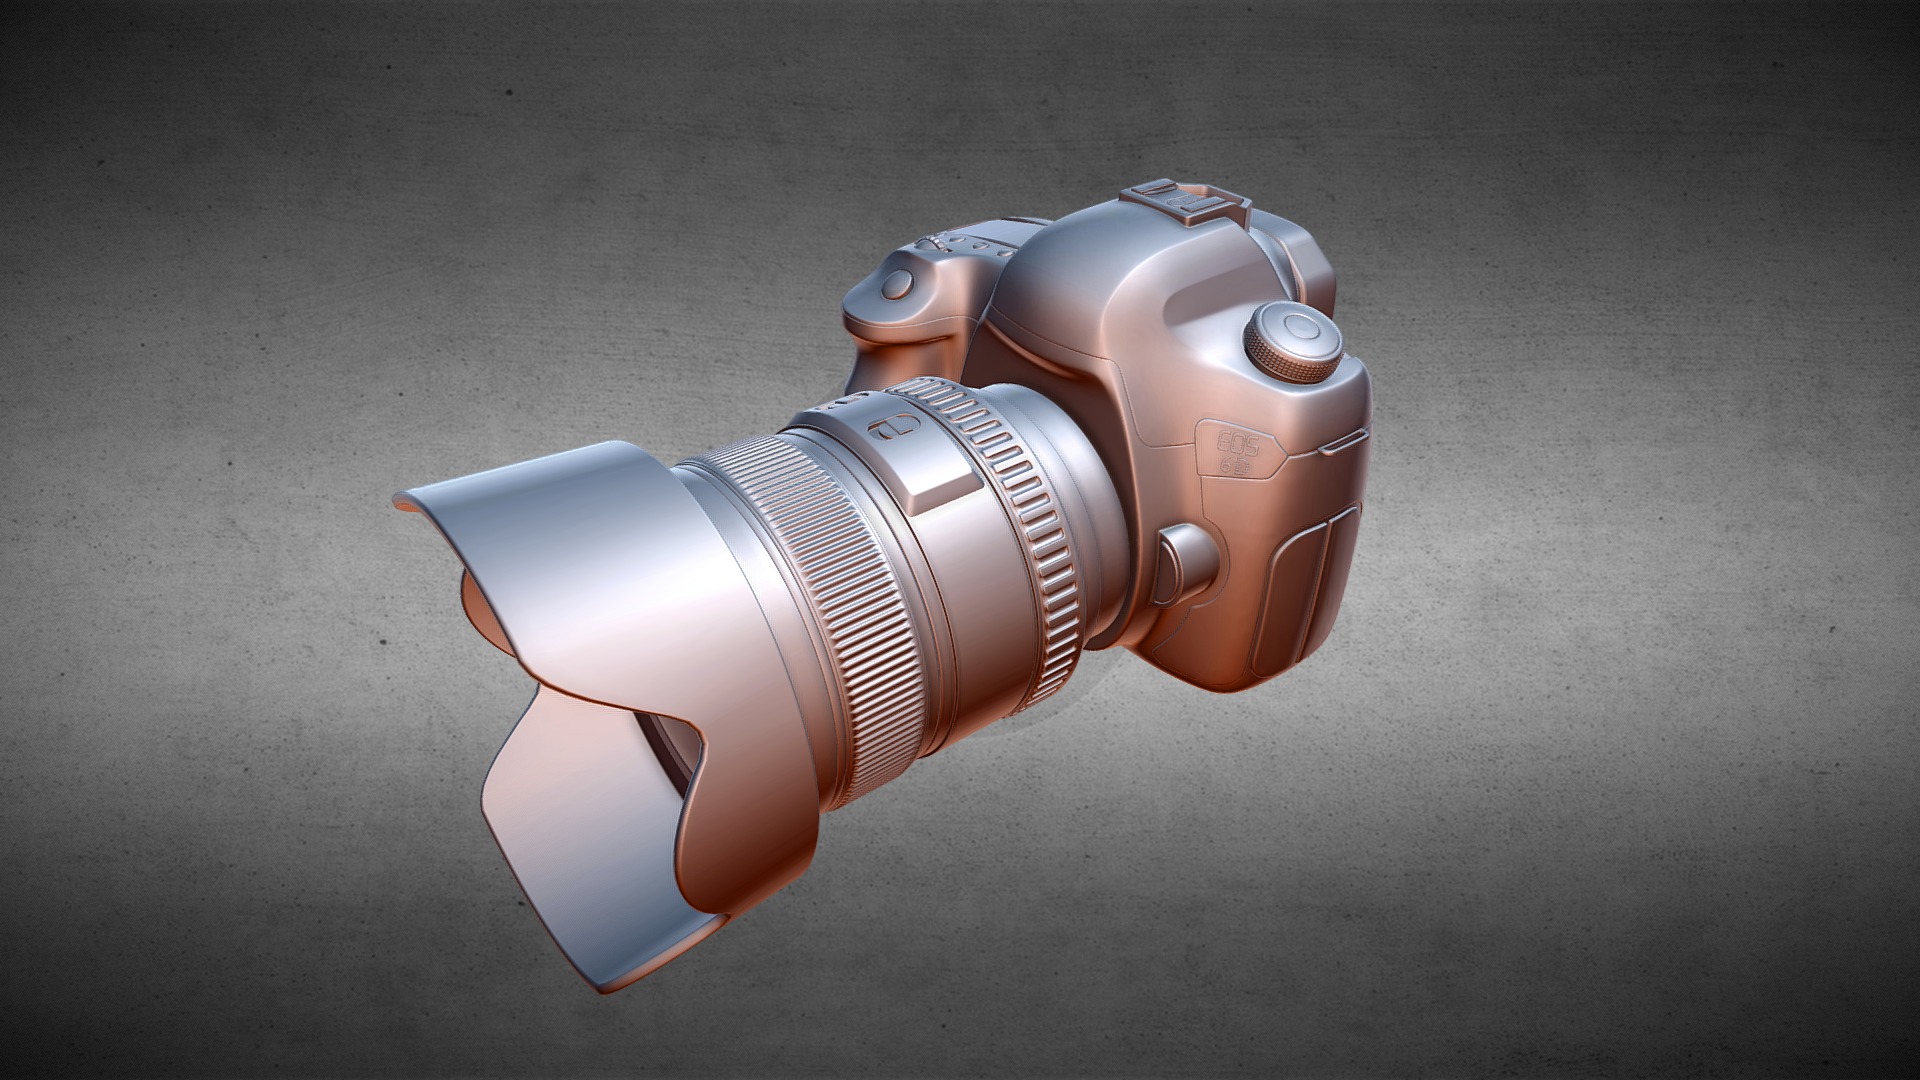 3D model Canon6d - This is a 3D model of the Canon6d. The 3D model is about a metal robot with a red and white face.